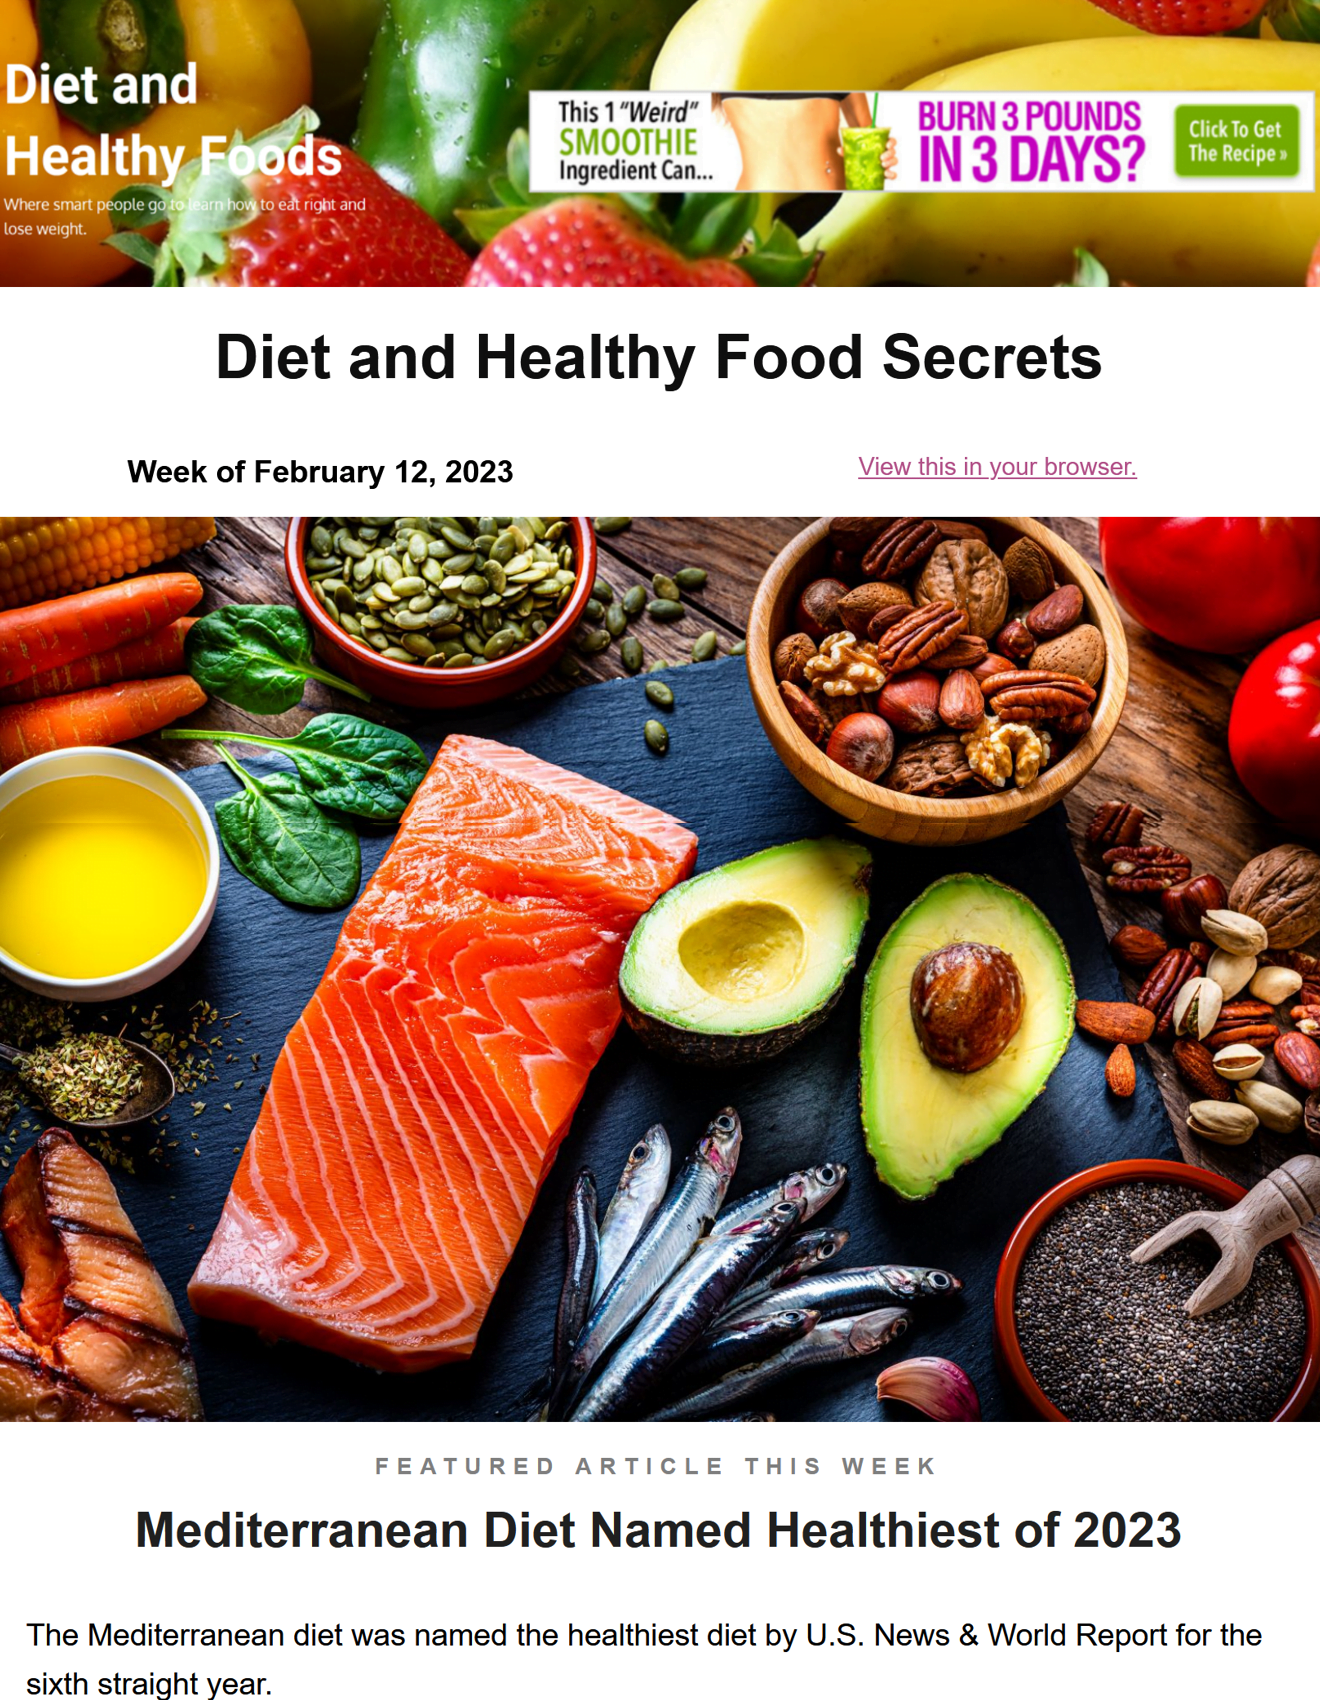 Diet and Healthy Foods Secrets